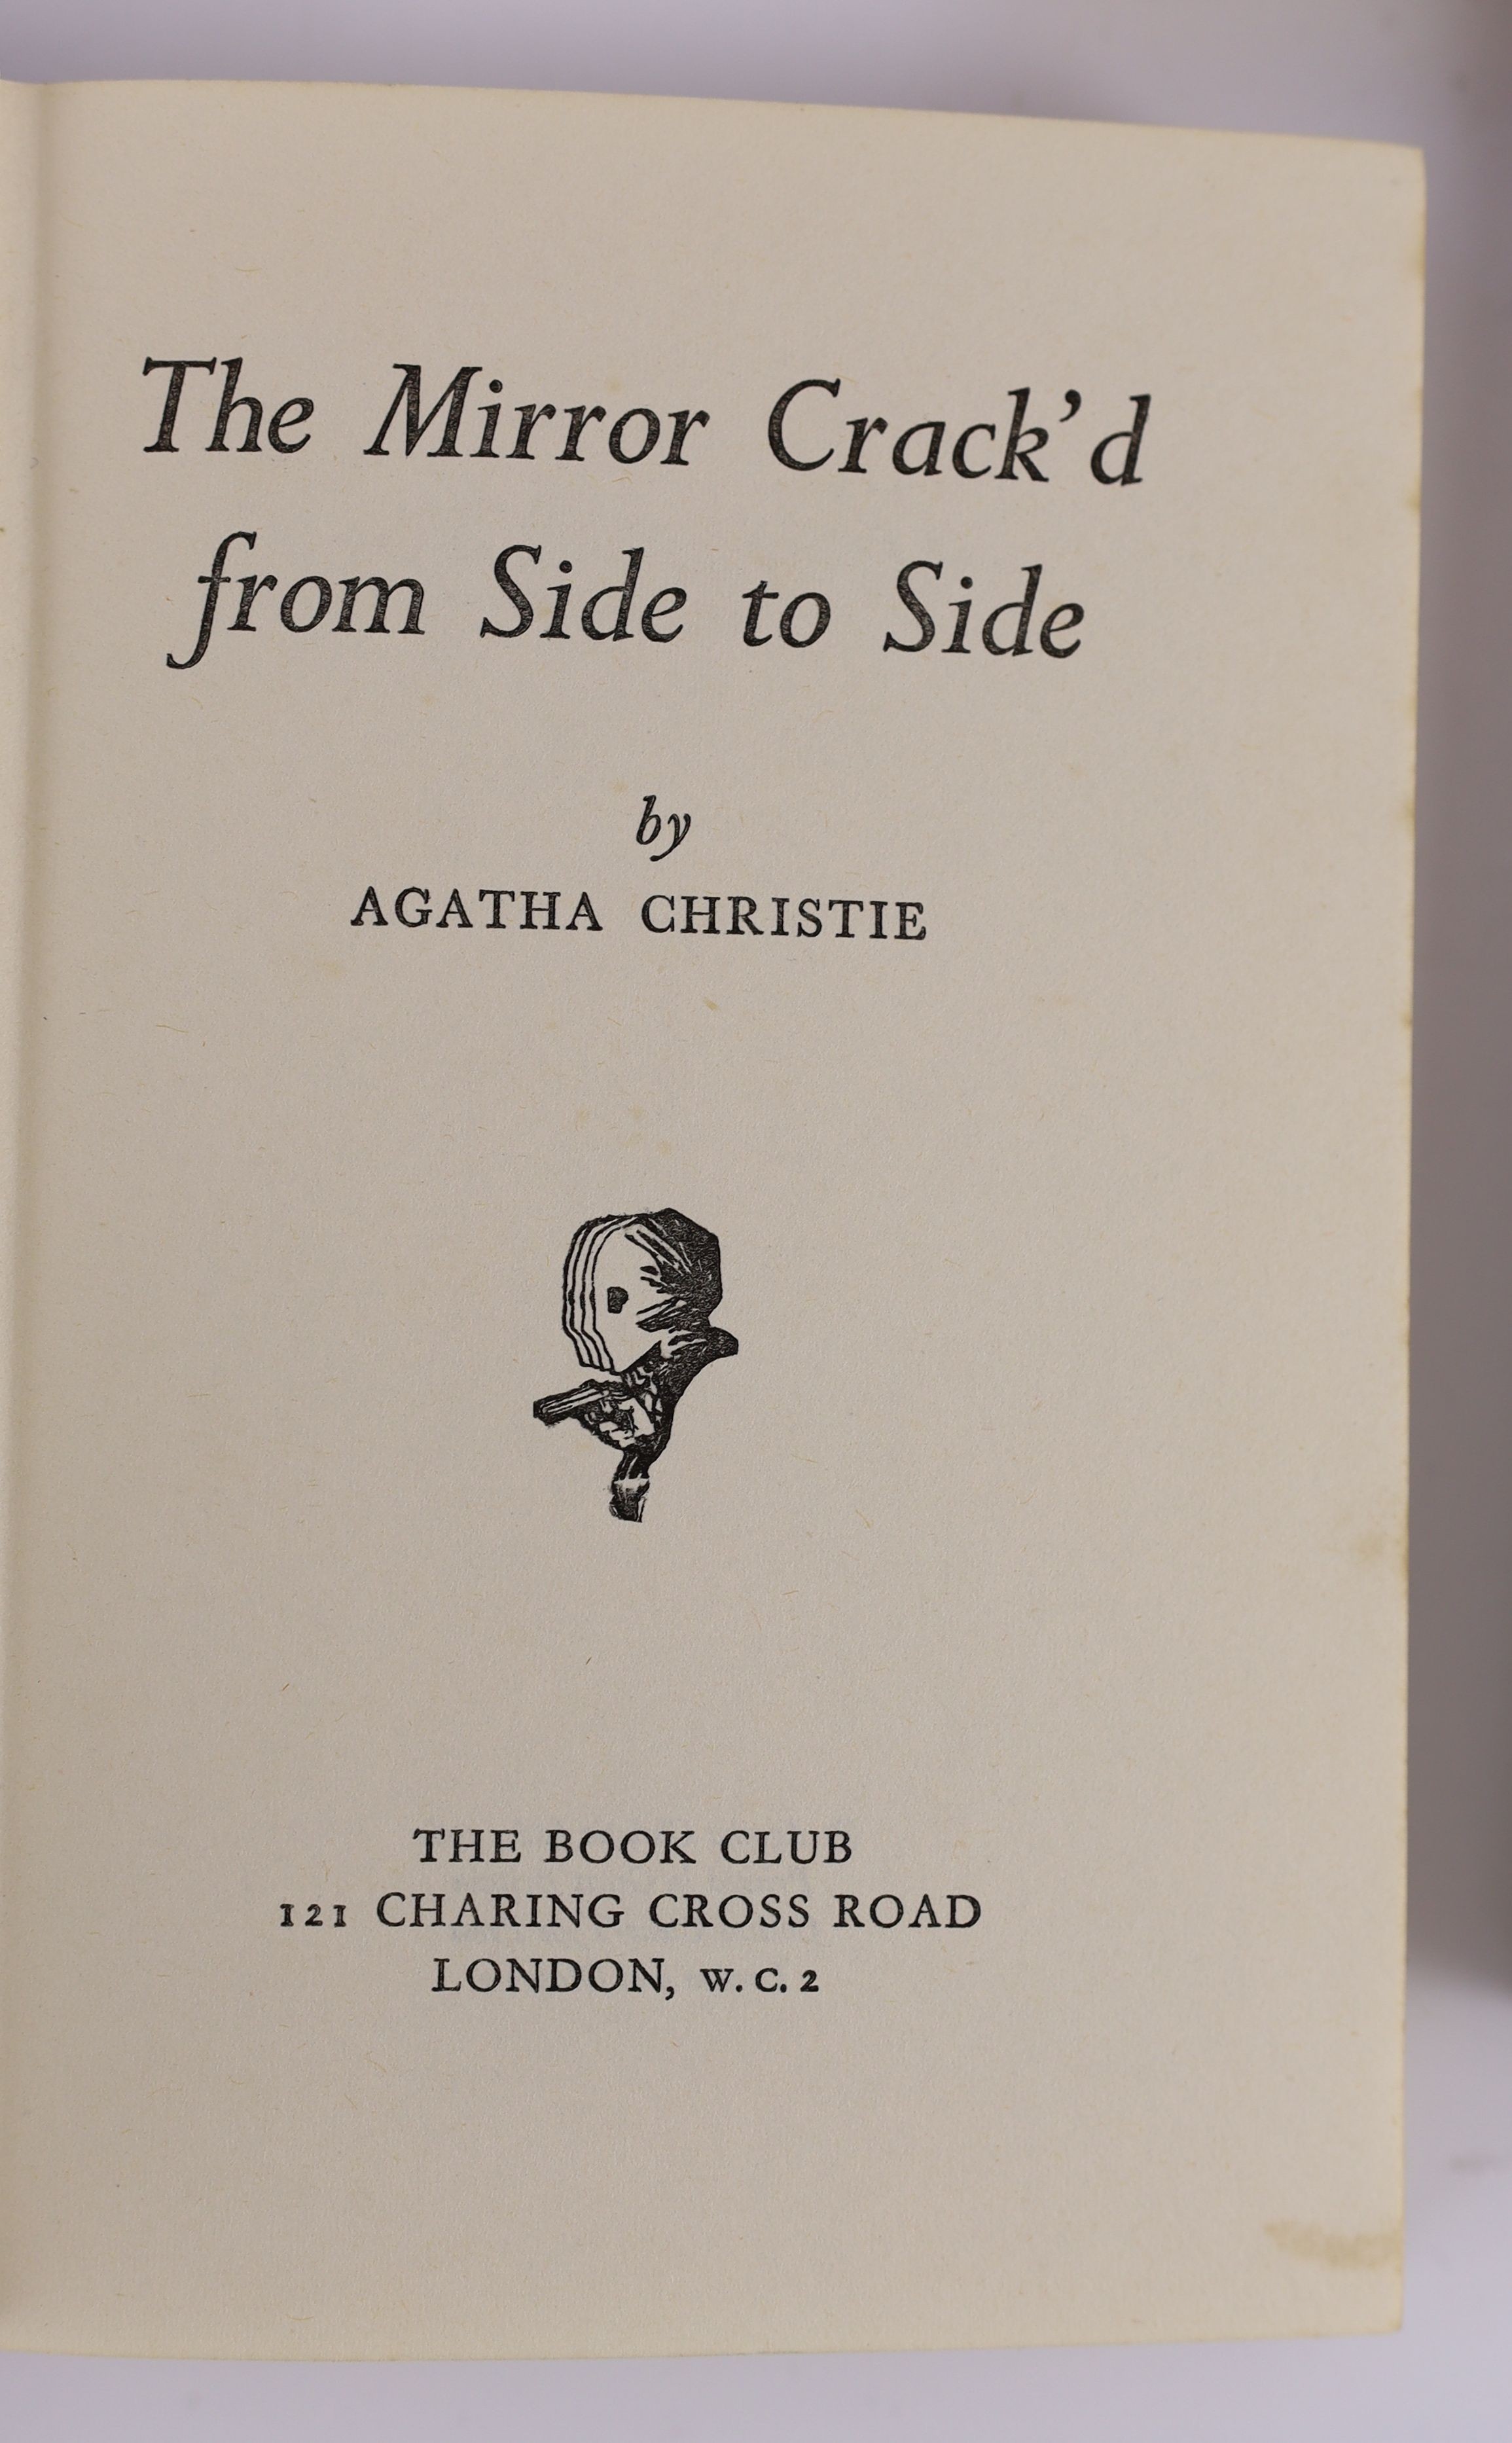 Christie, Agatha - Three works - The Pale Horse, 1st edition